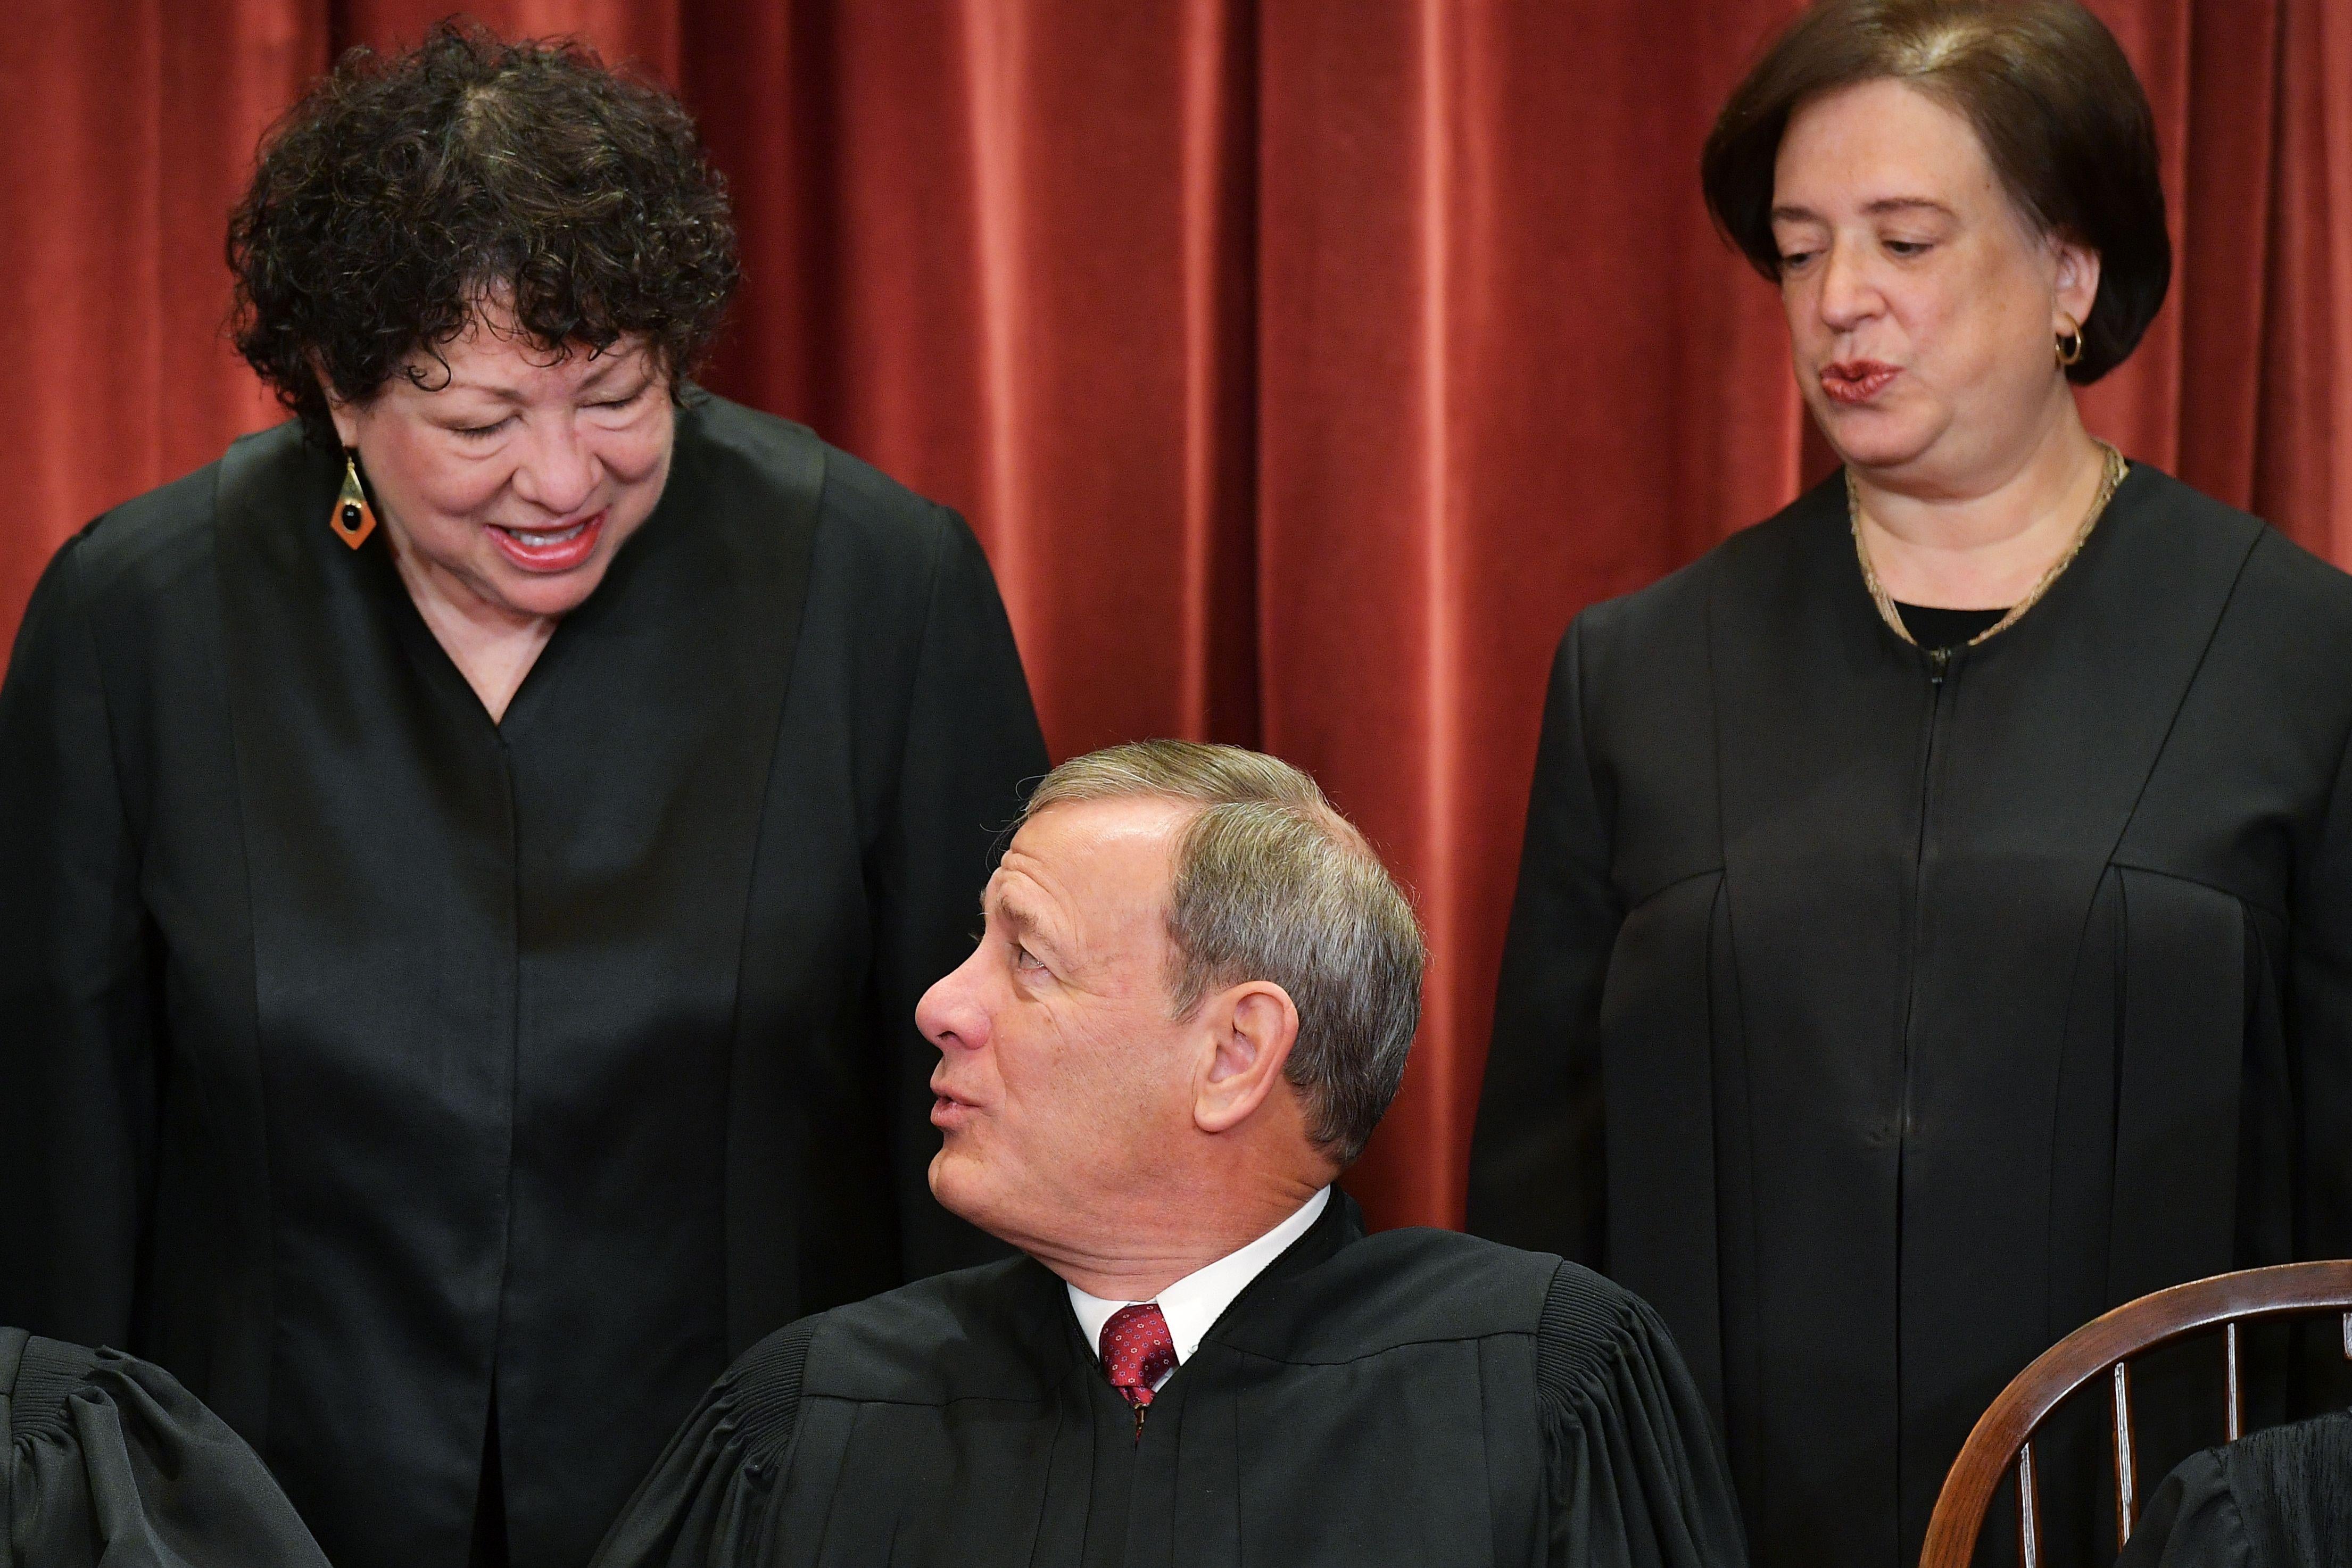 Associate Justice Sonia Sotomayor chats with Chief Justice John Roberts as Associate Justice Elena Kagan looks on while posing for the US Supreme Court official photo at the Supreme Court in Washington, D.C.